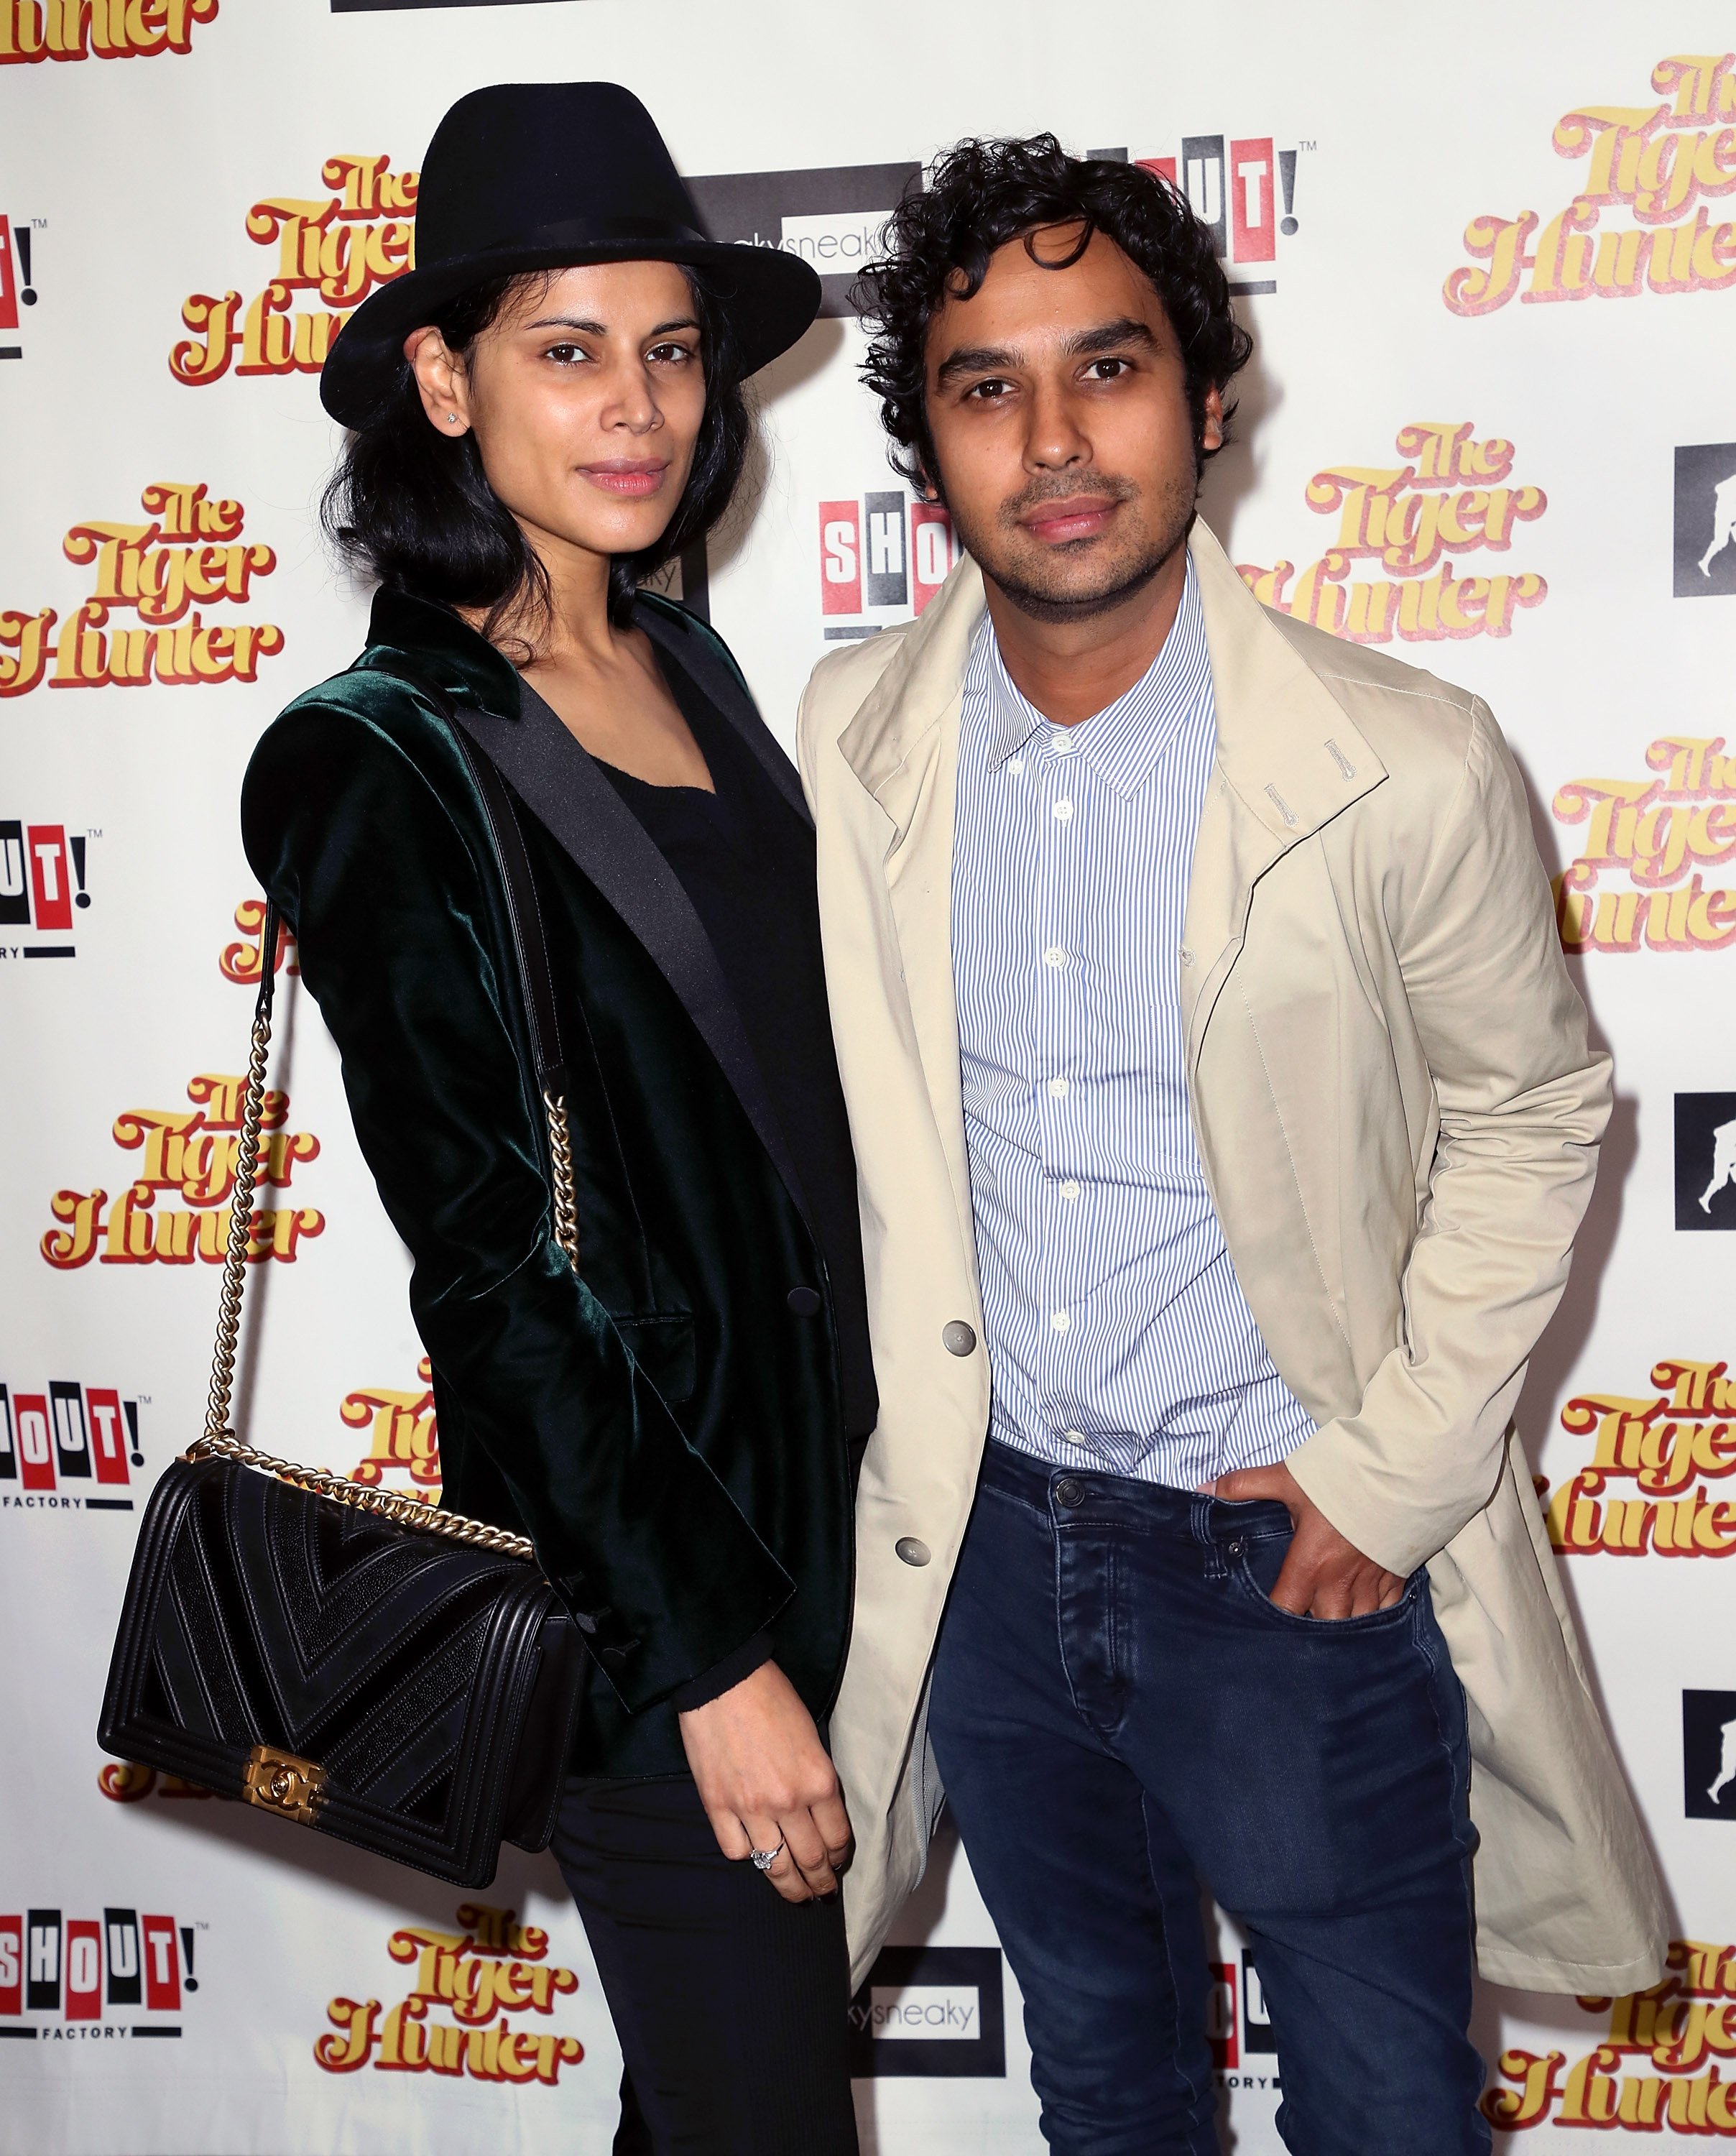 Neha Kapur and her husband Kunal Nayyar at the premiere of "The Tiger Hunter" in Santa Monica | Source: Getty Images 